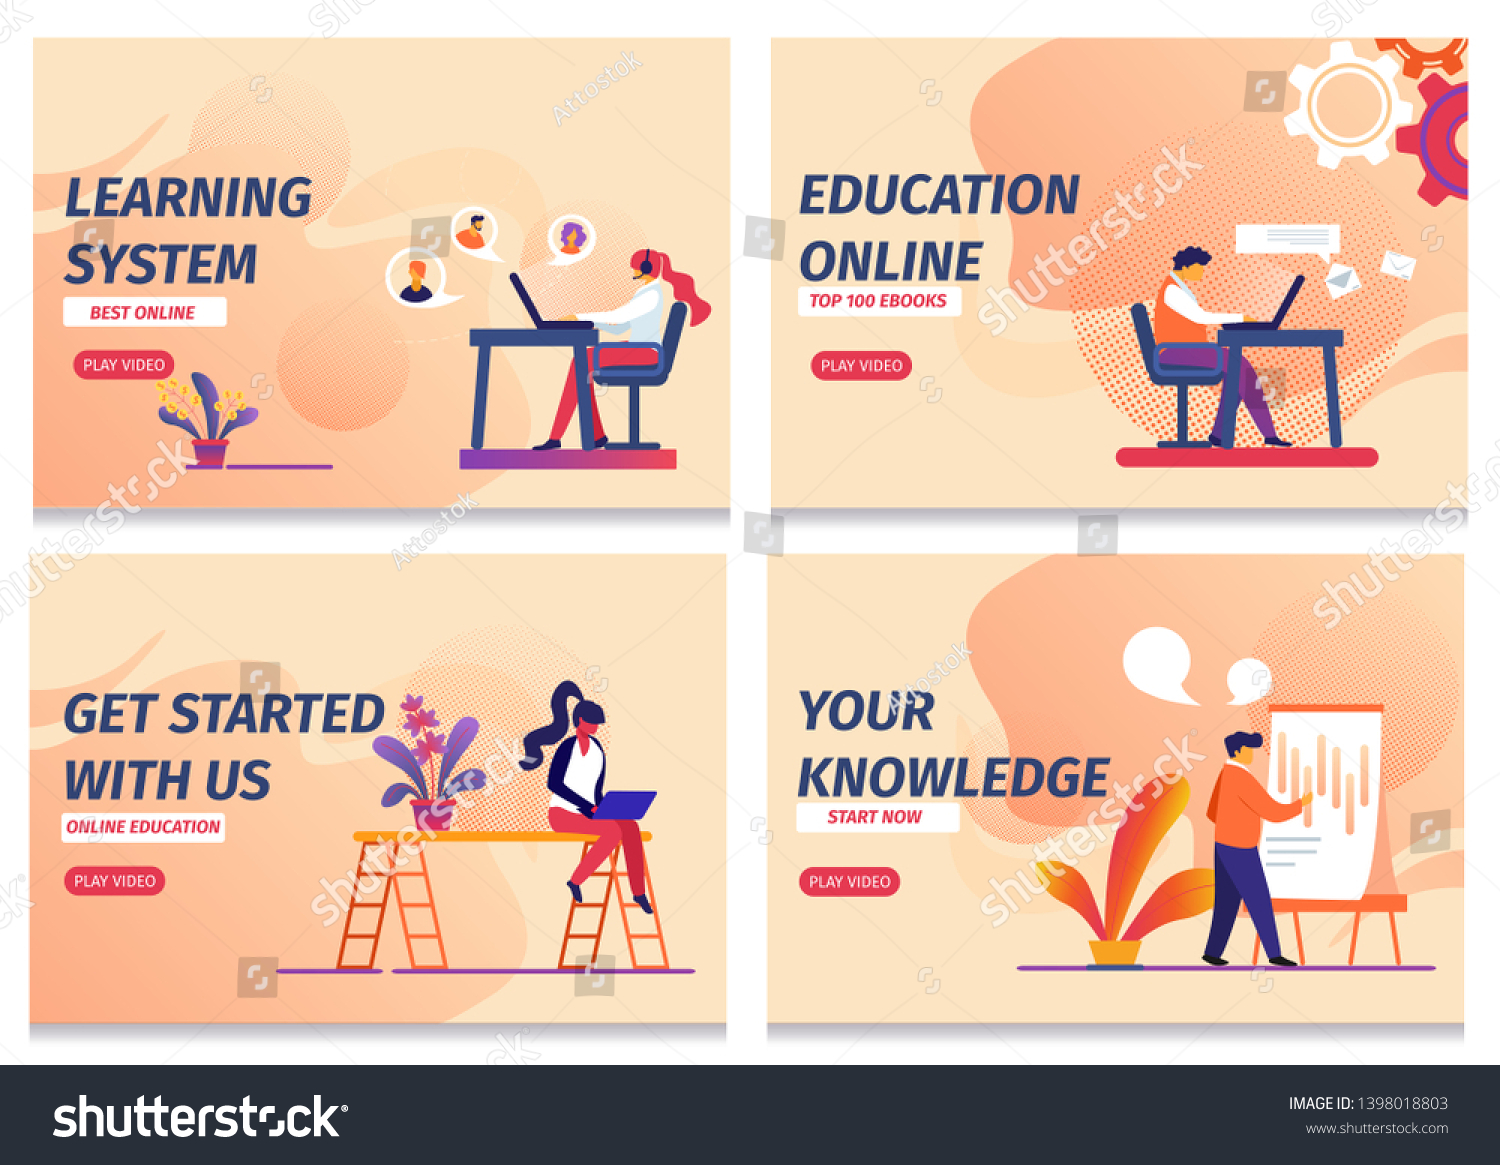 Learning System Start Online Education Knowledge Stock Vector